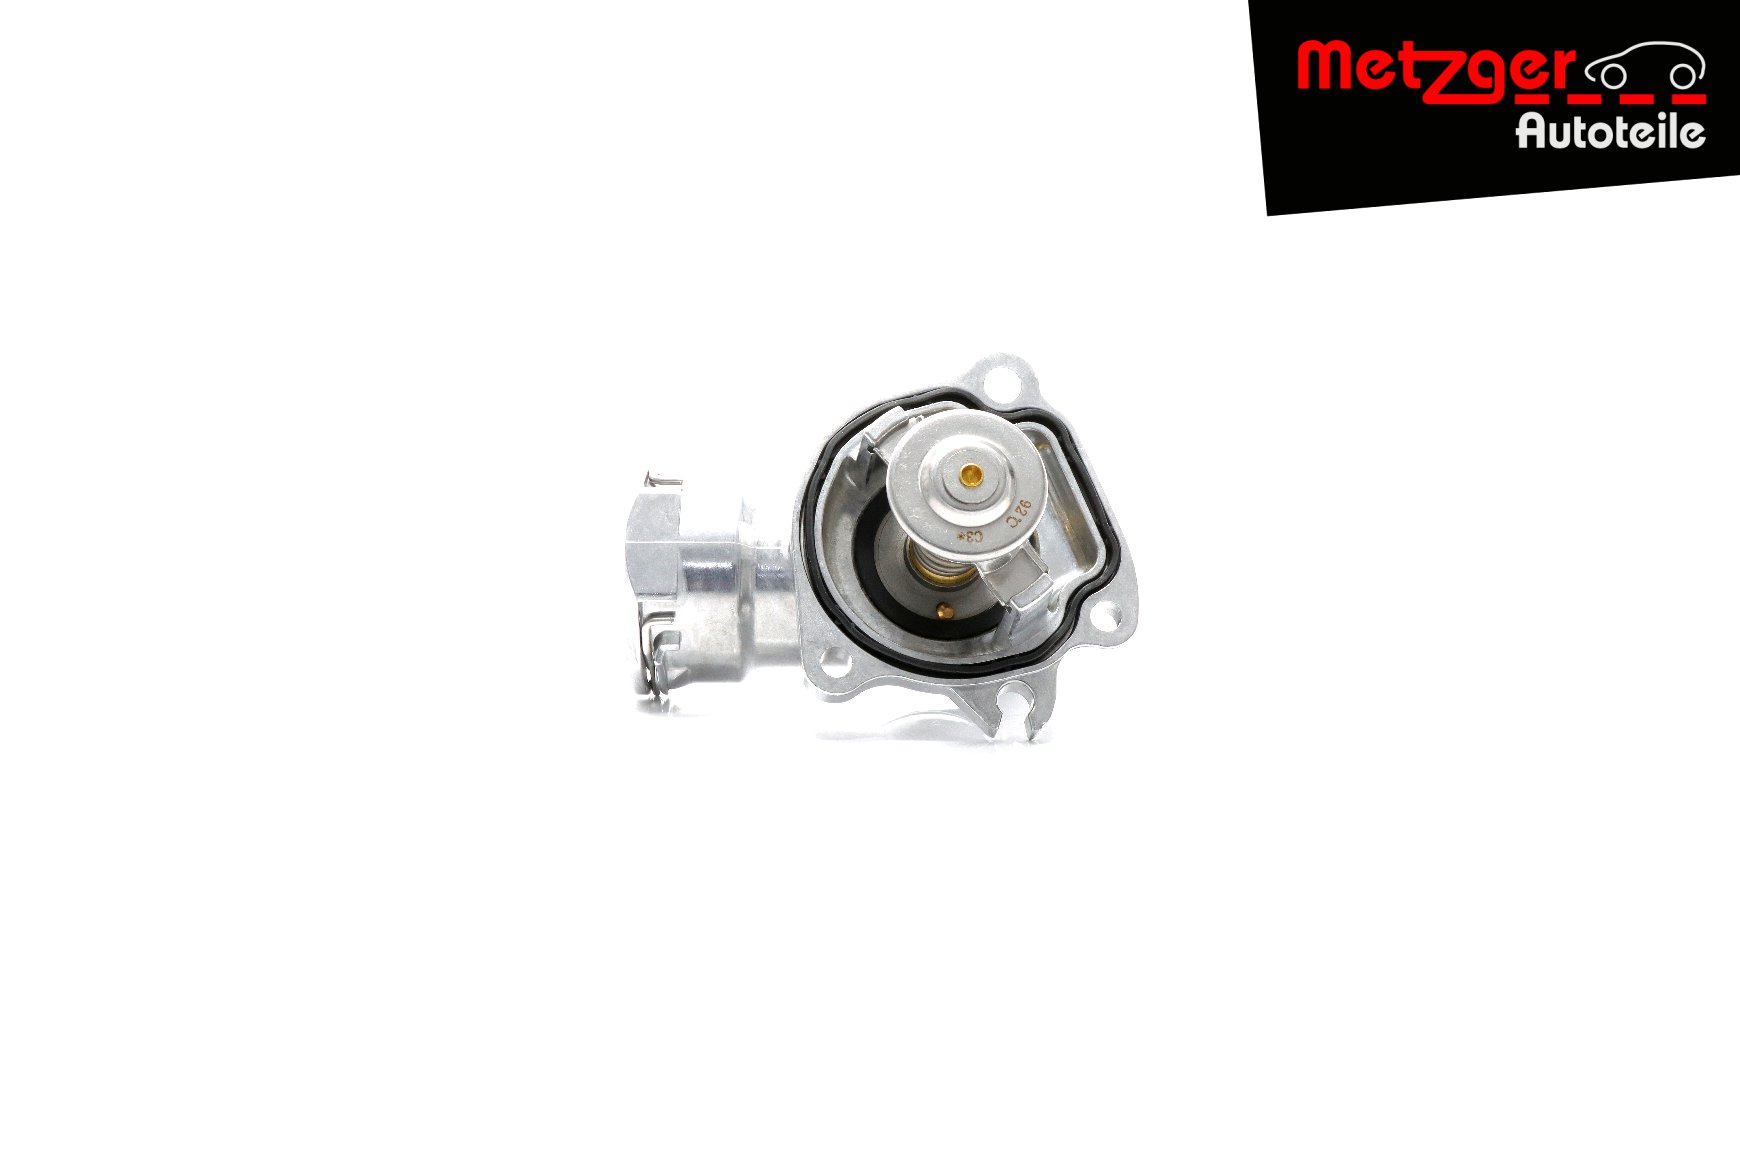 METZGER 4006328 Engine thermostat Opening Temperature: 92°C, with housing